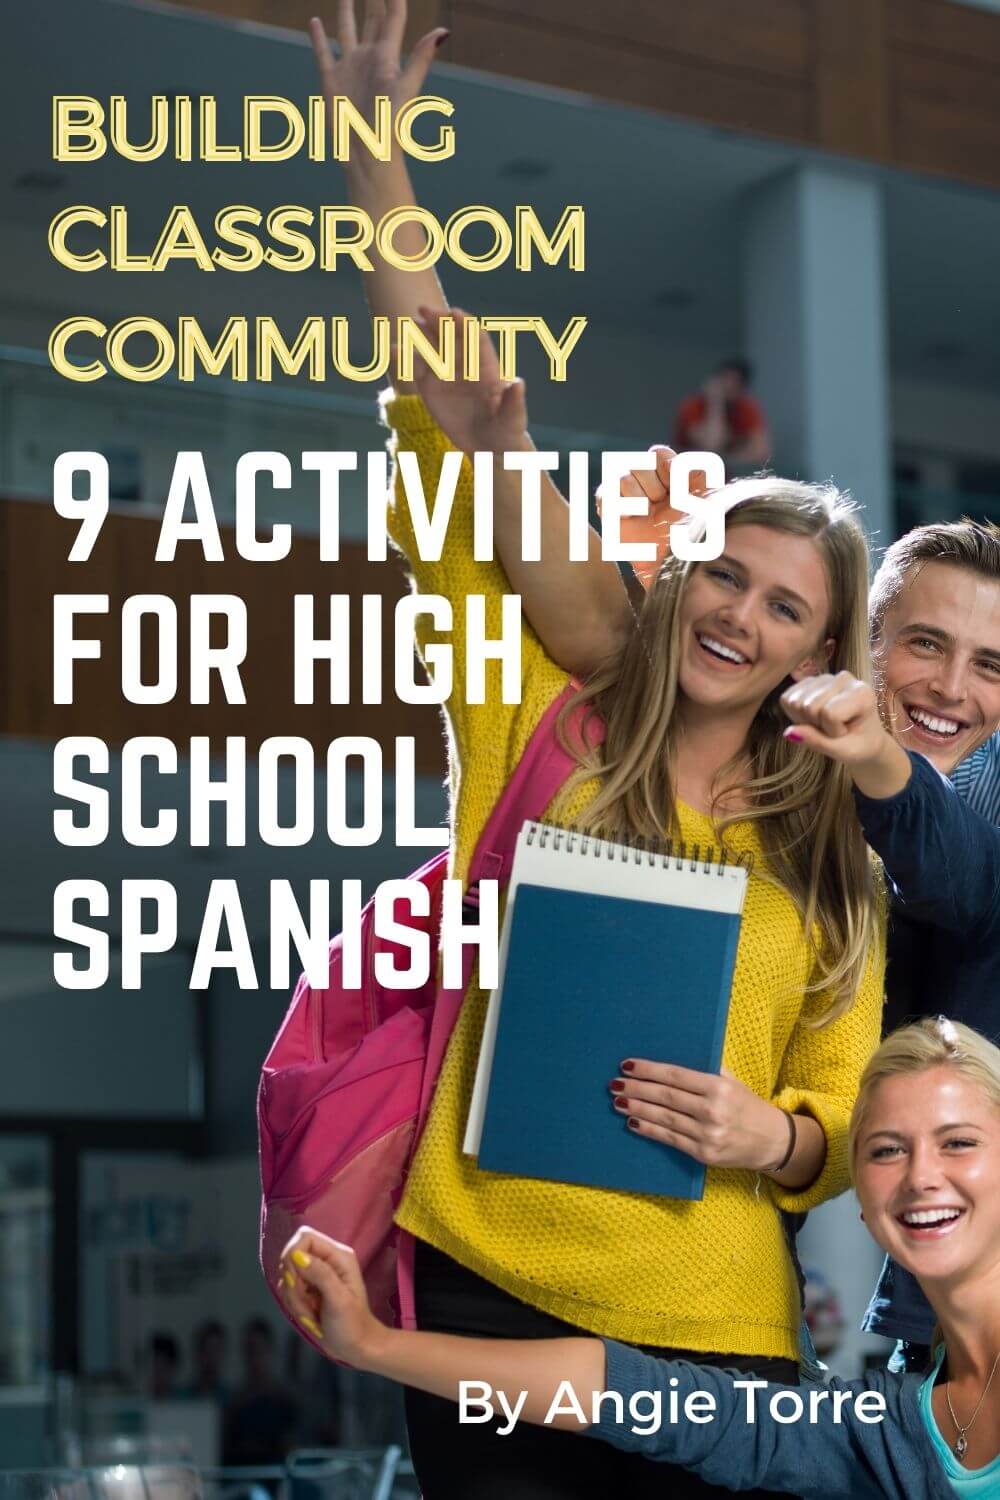 Building Community in the Classroom – 9 Awesome Activities for High School Spanish Students raising their hands and happily learning